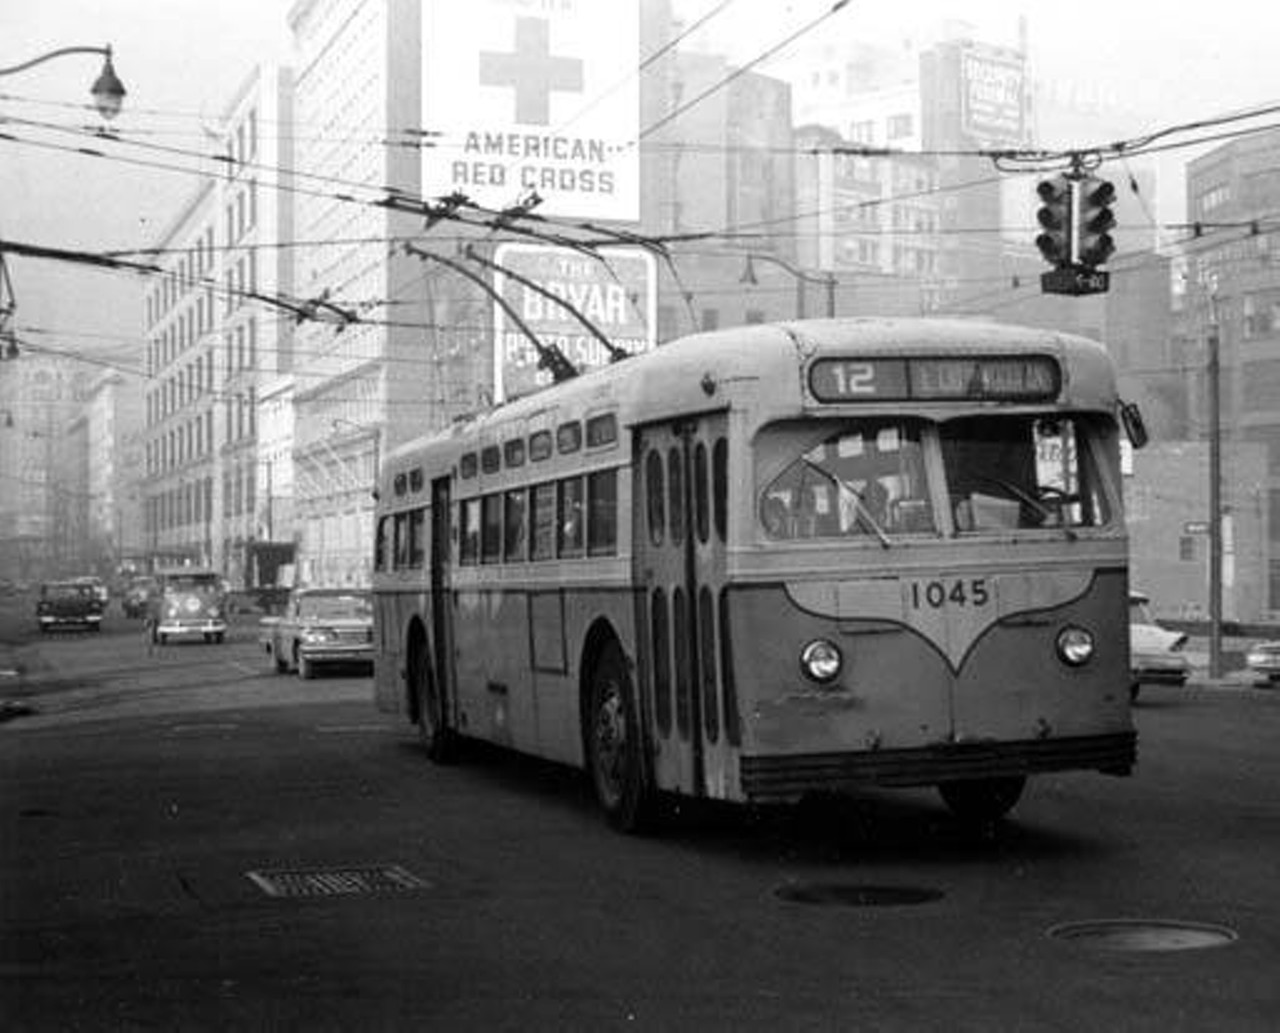 Cleveland Transit Trackless Trolley 1045 at Prospect Avenue and East 14th Street in Cleveland, Ohio. 
Post Industrial 1930-1959